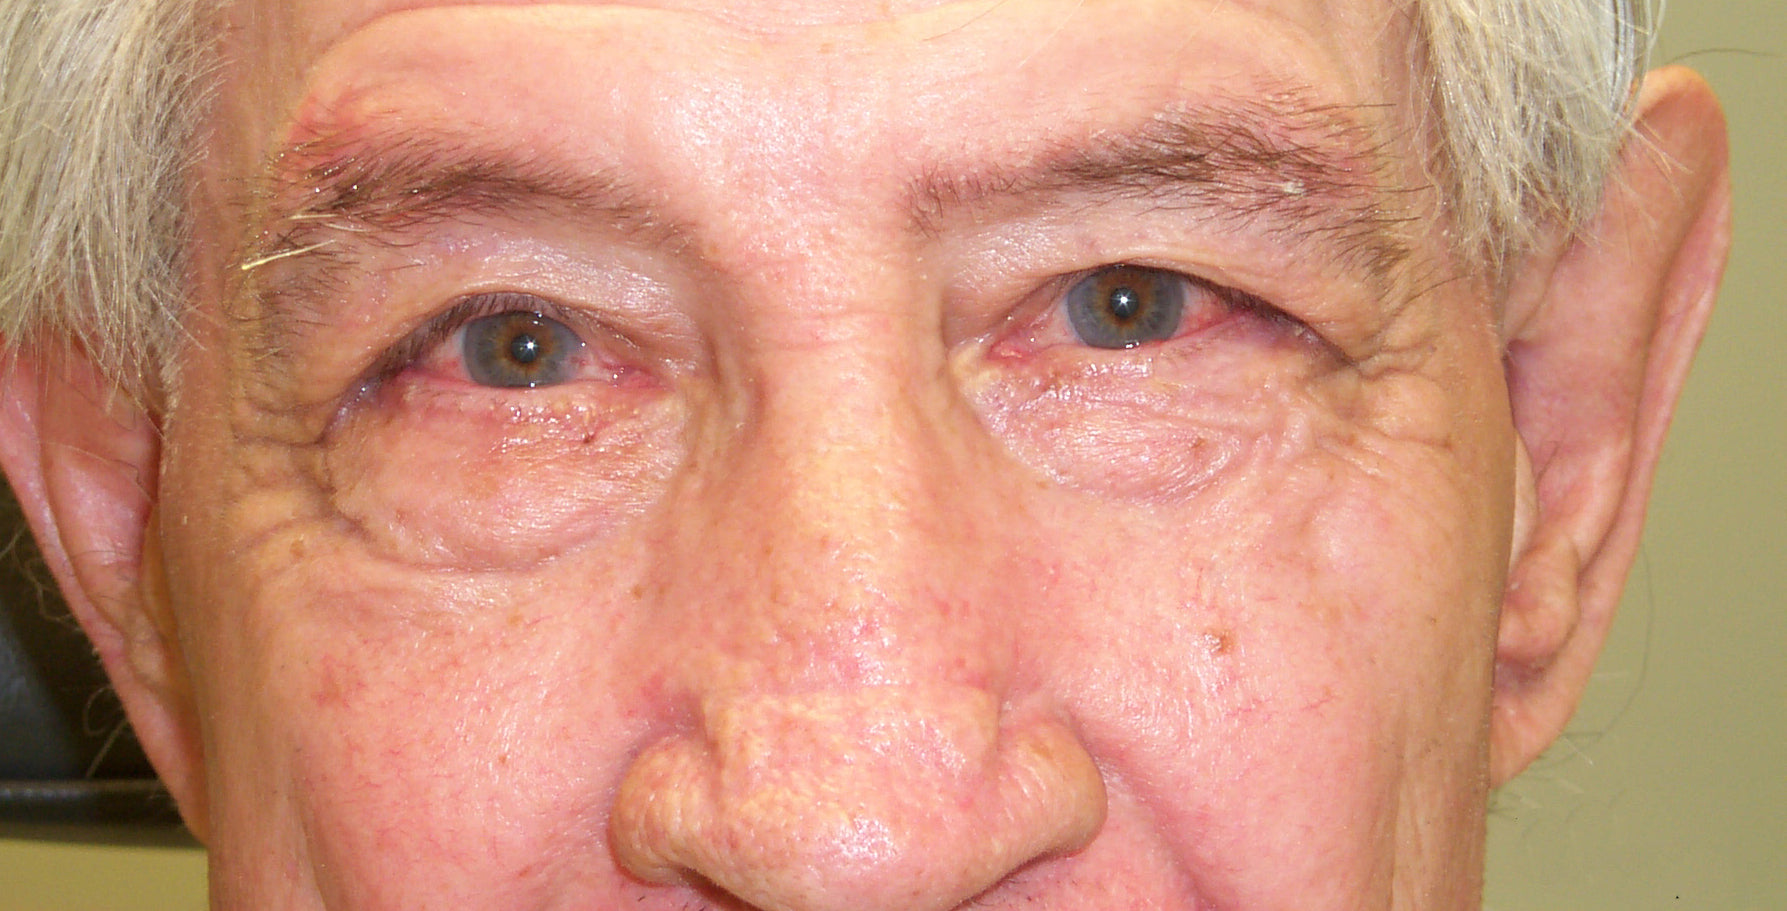 Rosacea causes facial redness and eye irritation that can worsen the symptoms of dry eye.